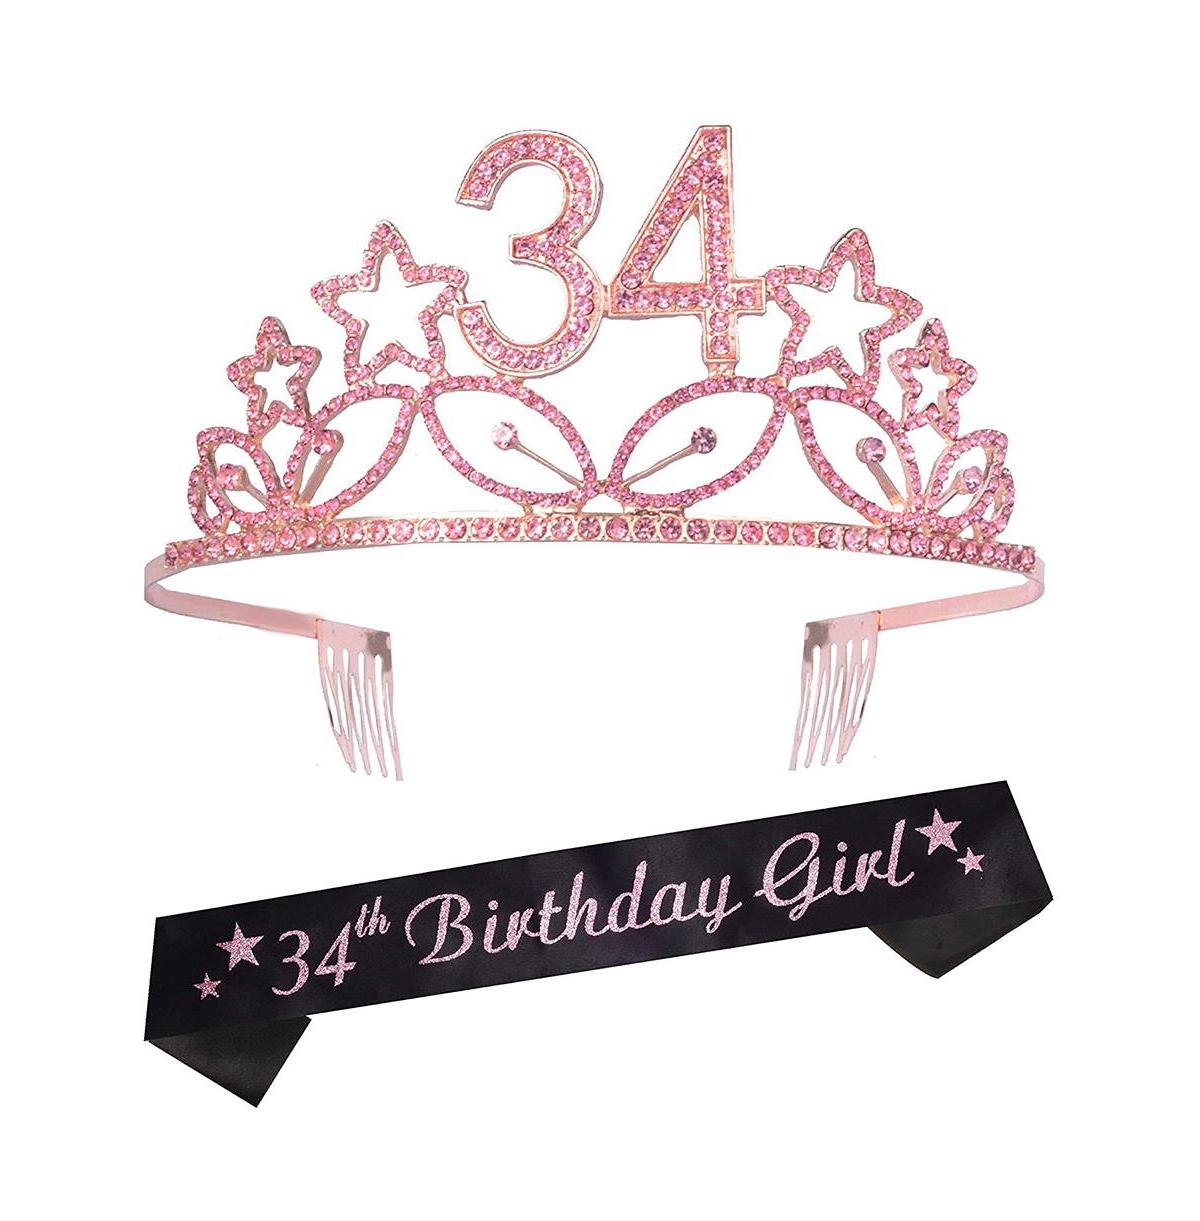 34th Birthday Sash and Tiara Set for Women - Glittery Sash with Stars and Pink Rhinestone Metal Tiara, Perfect for Celebrating 34th Birthday Party and